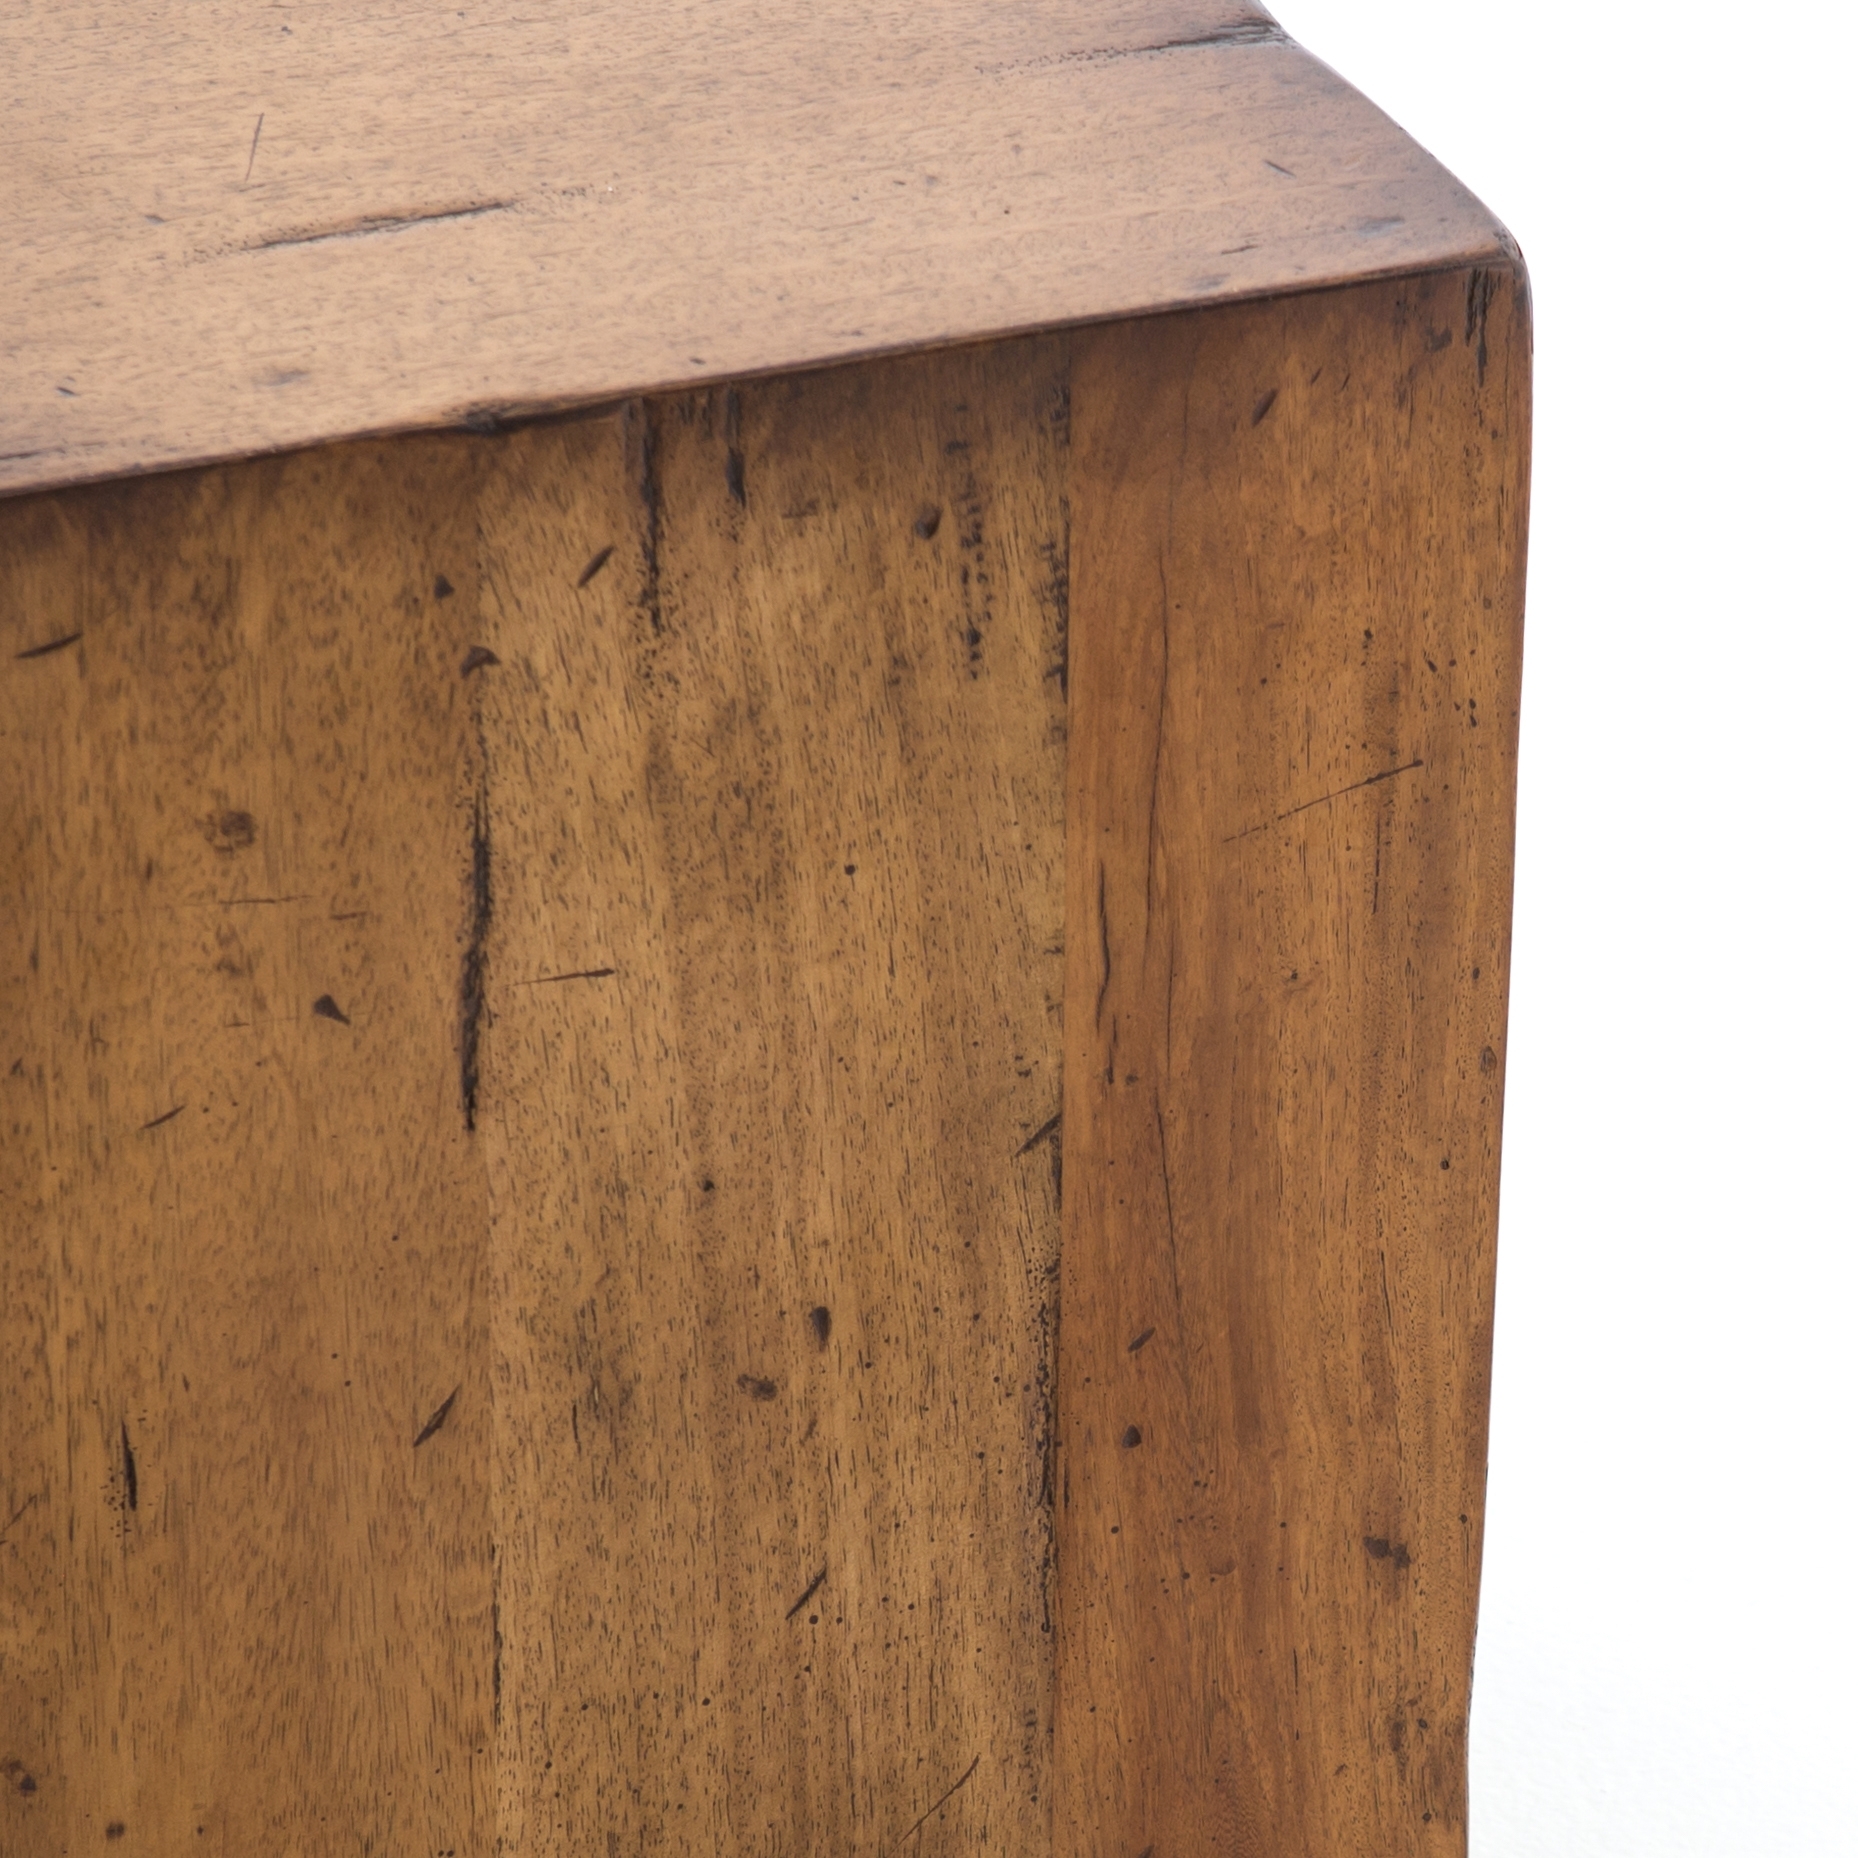 Duncan End Table-Reclaimed Fruitwood - Image 7